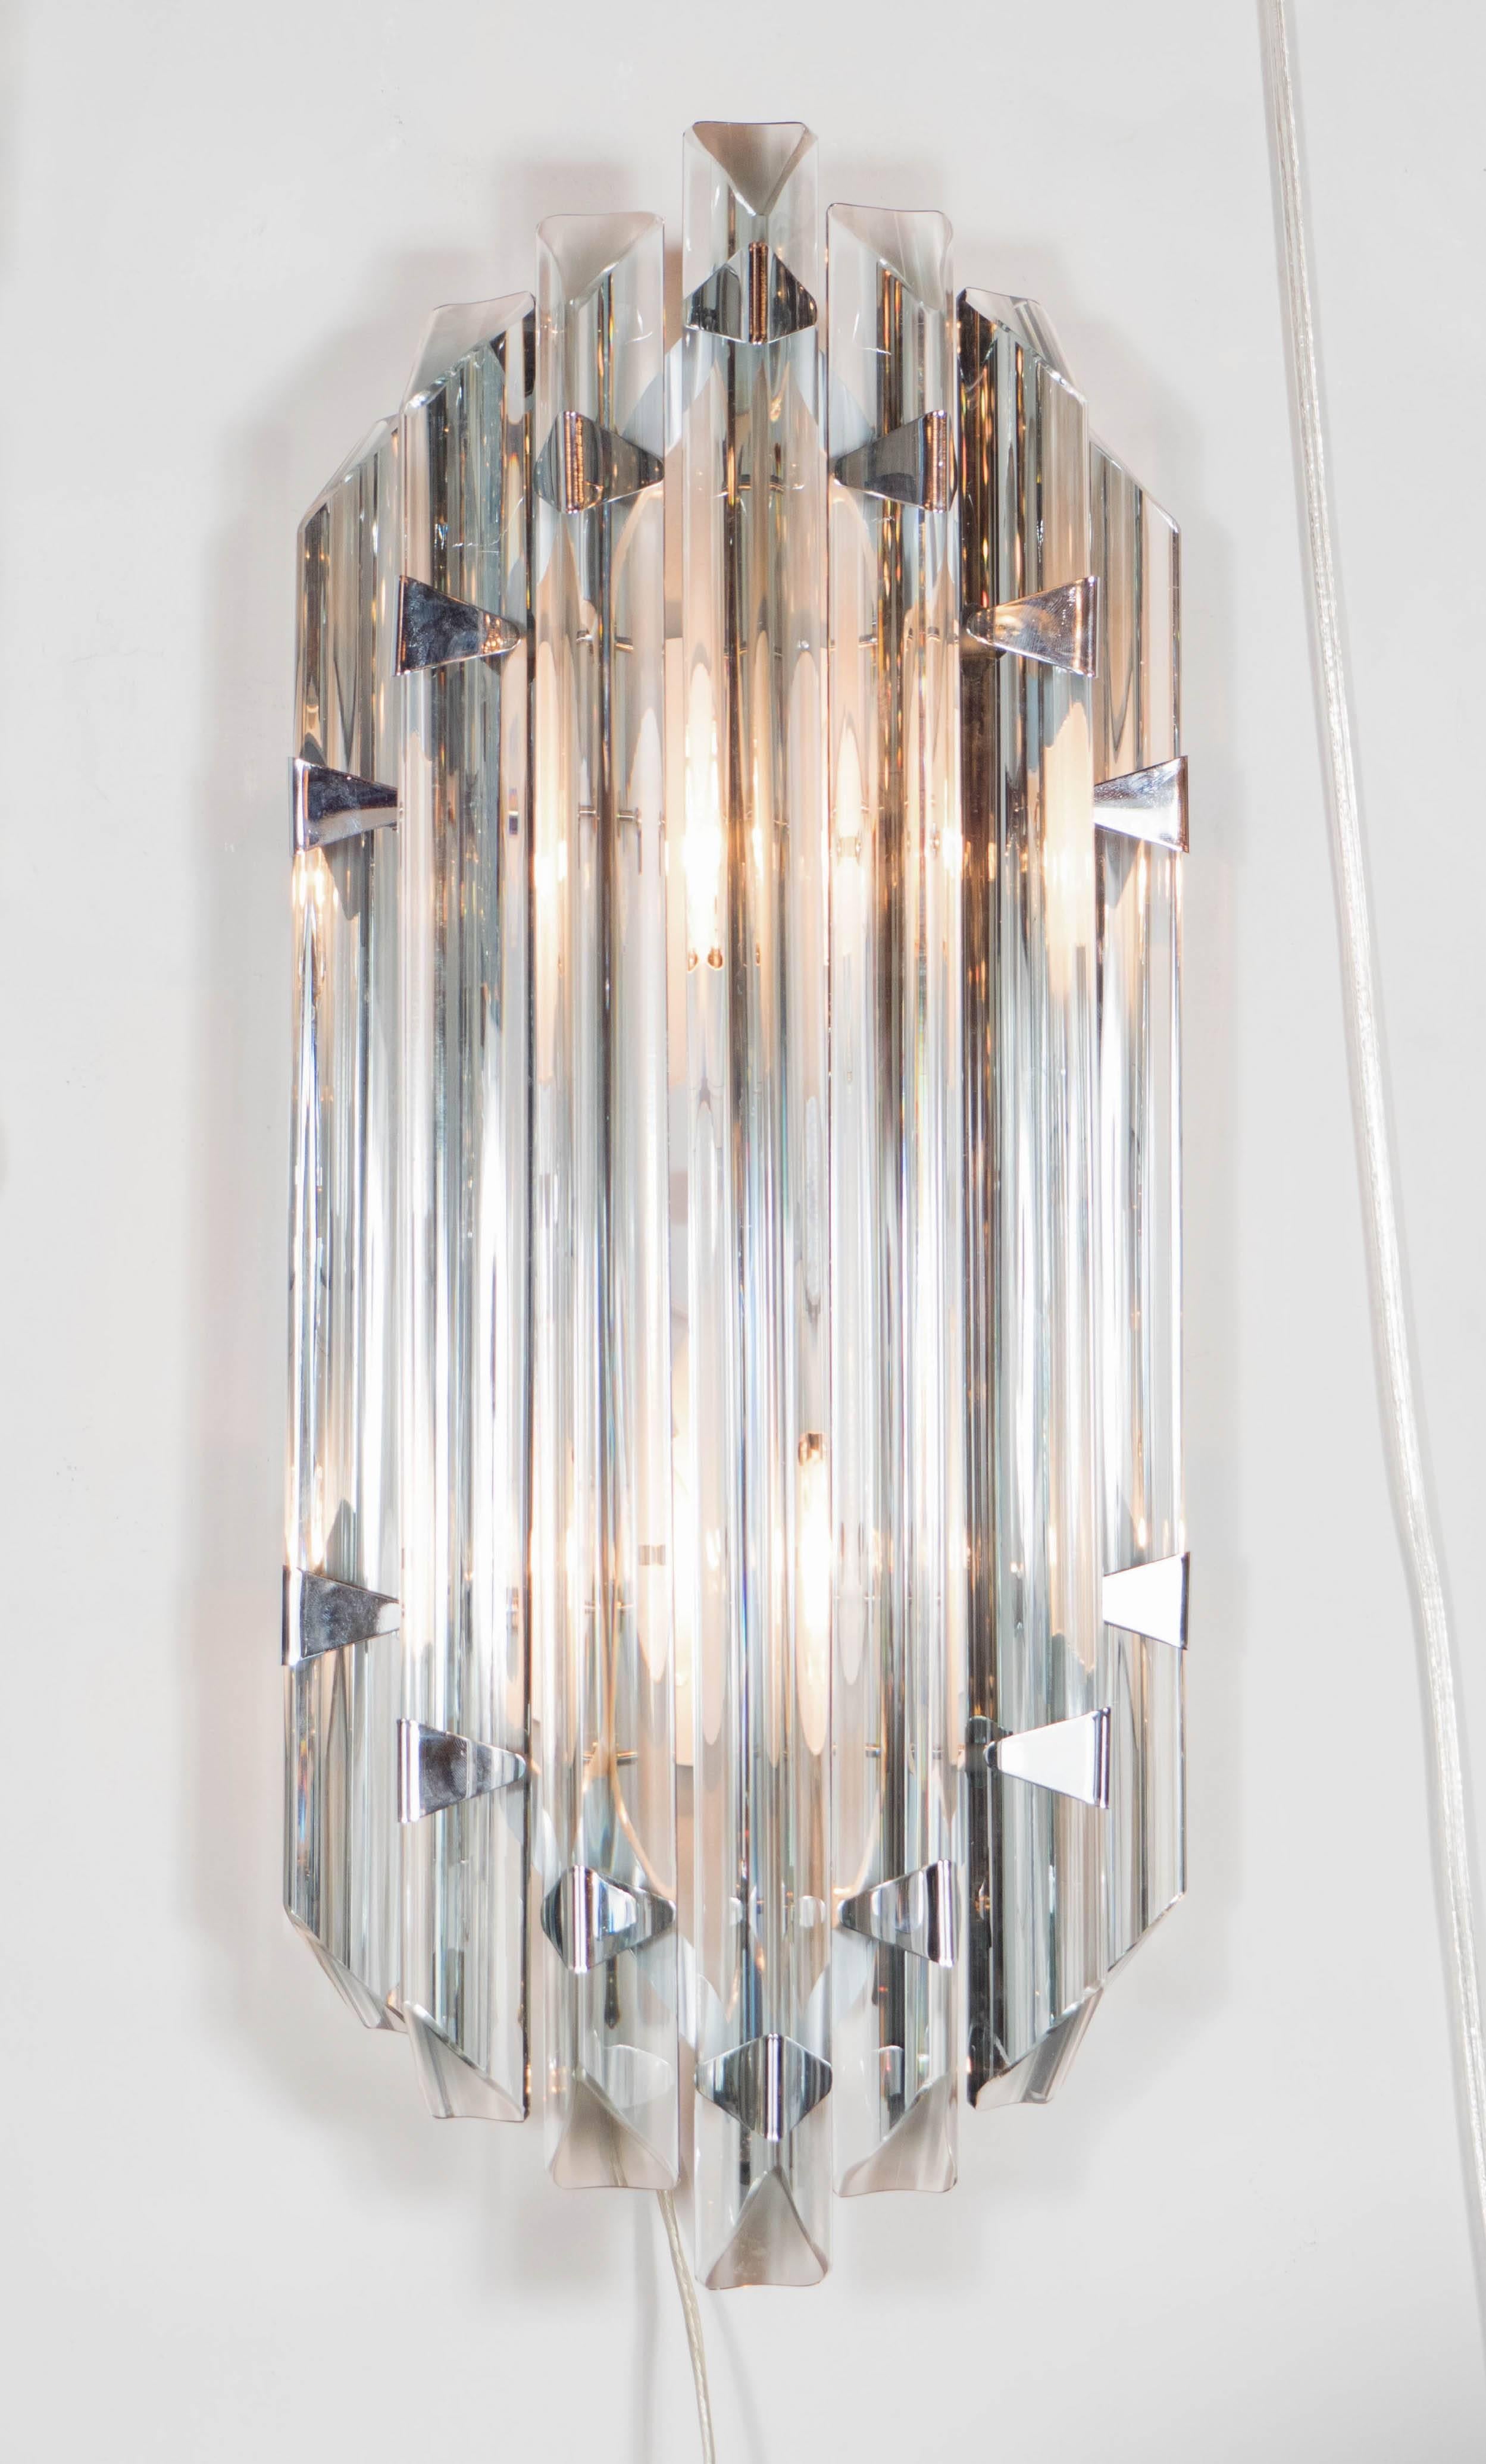 Italian Pair of Mid-Century Modernist Sconces in Smoked Murano Glass with Nickel